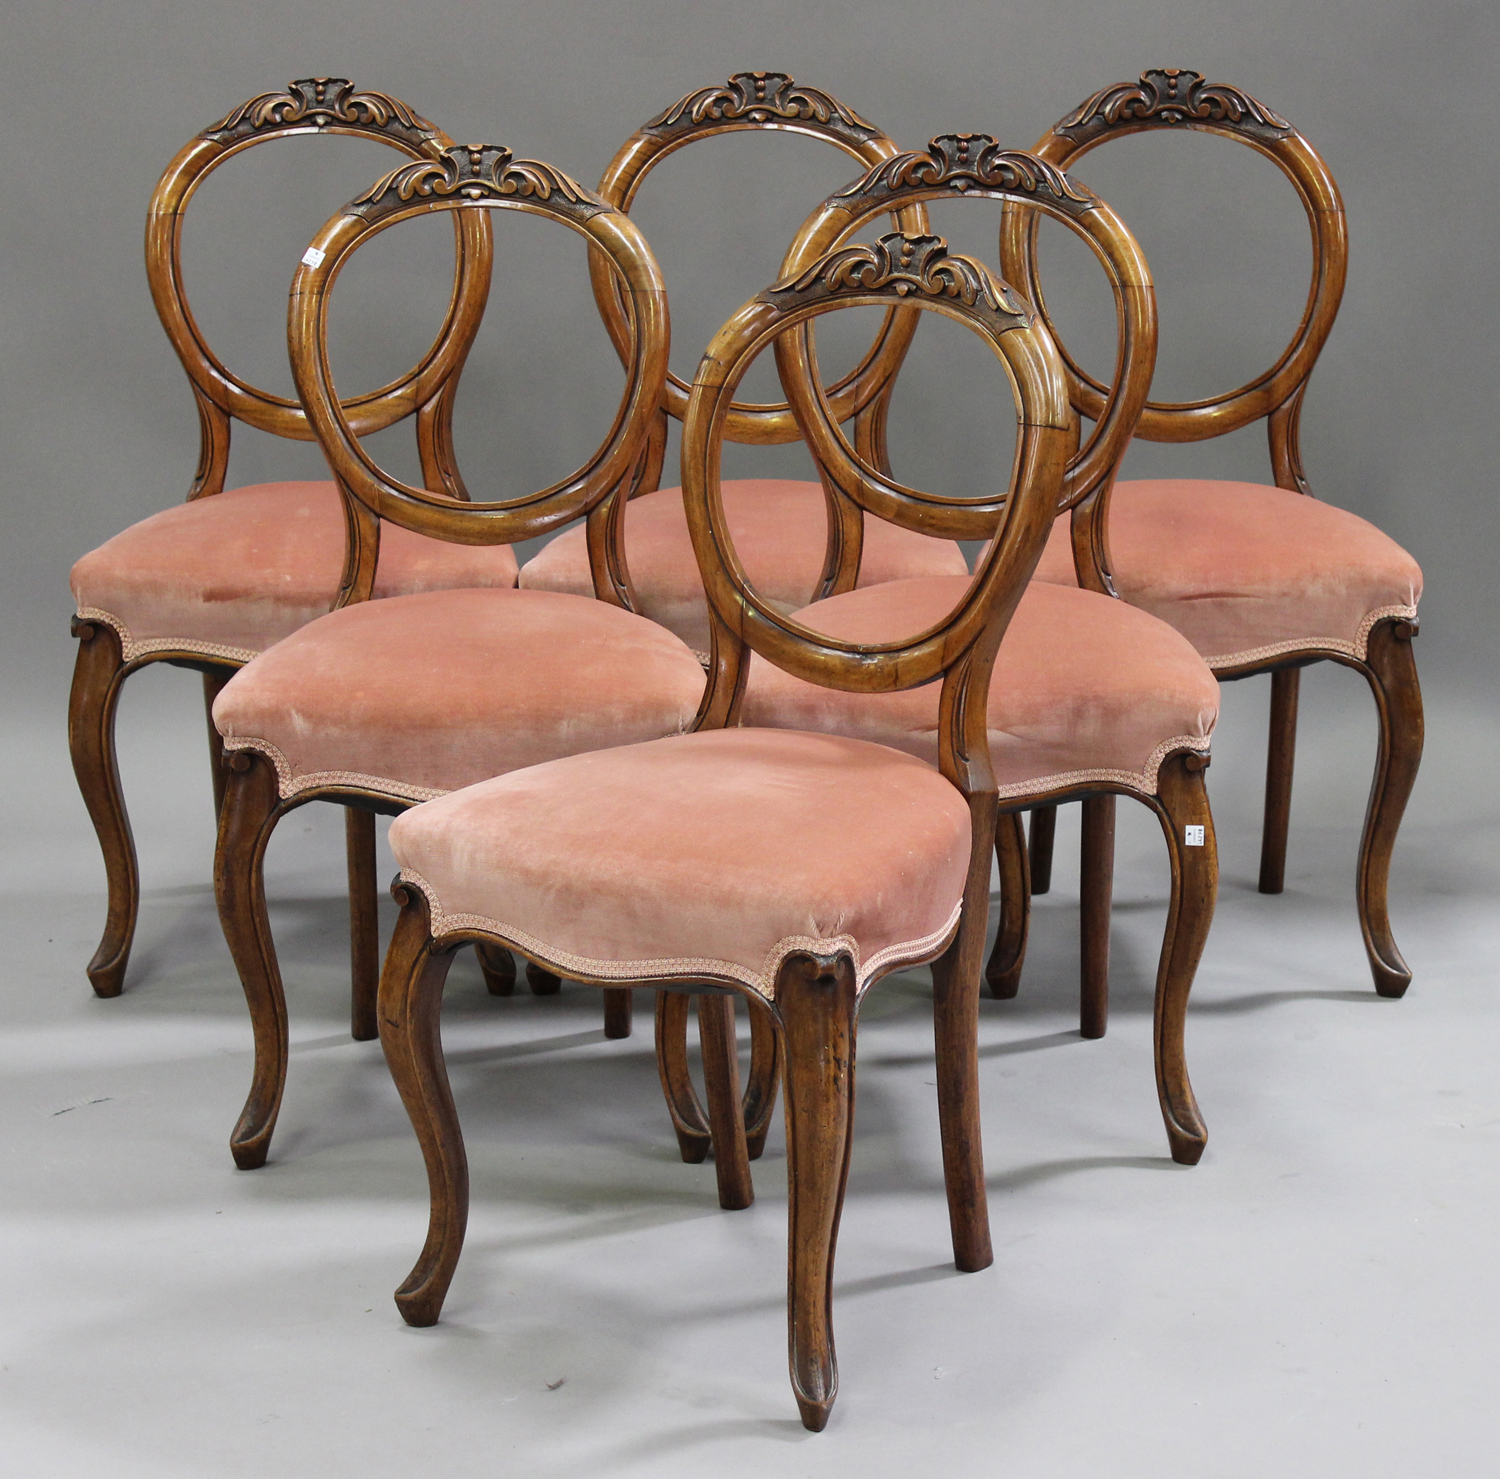 A set of six Victorian walnut spoon back dining chairs with carved decoration, the overstuffed seats